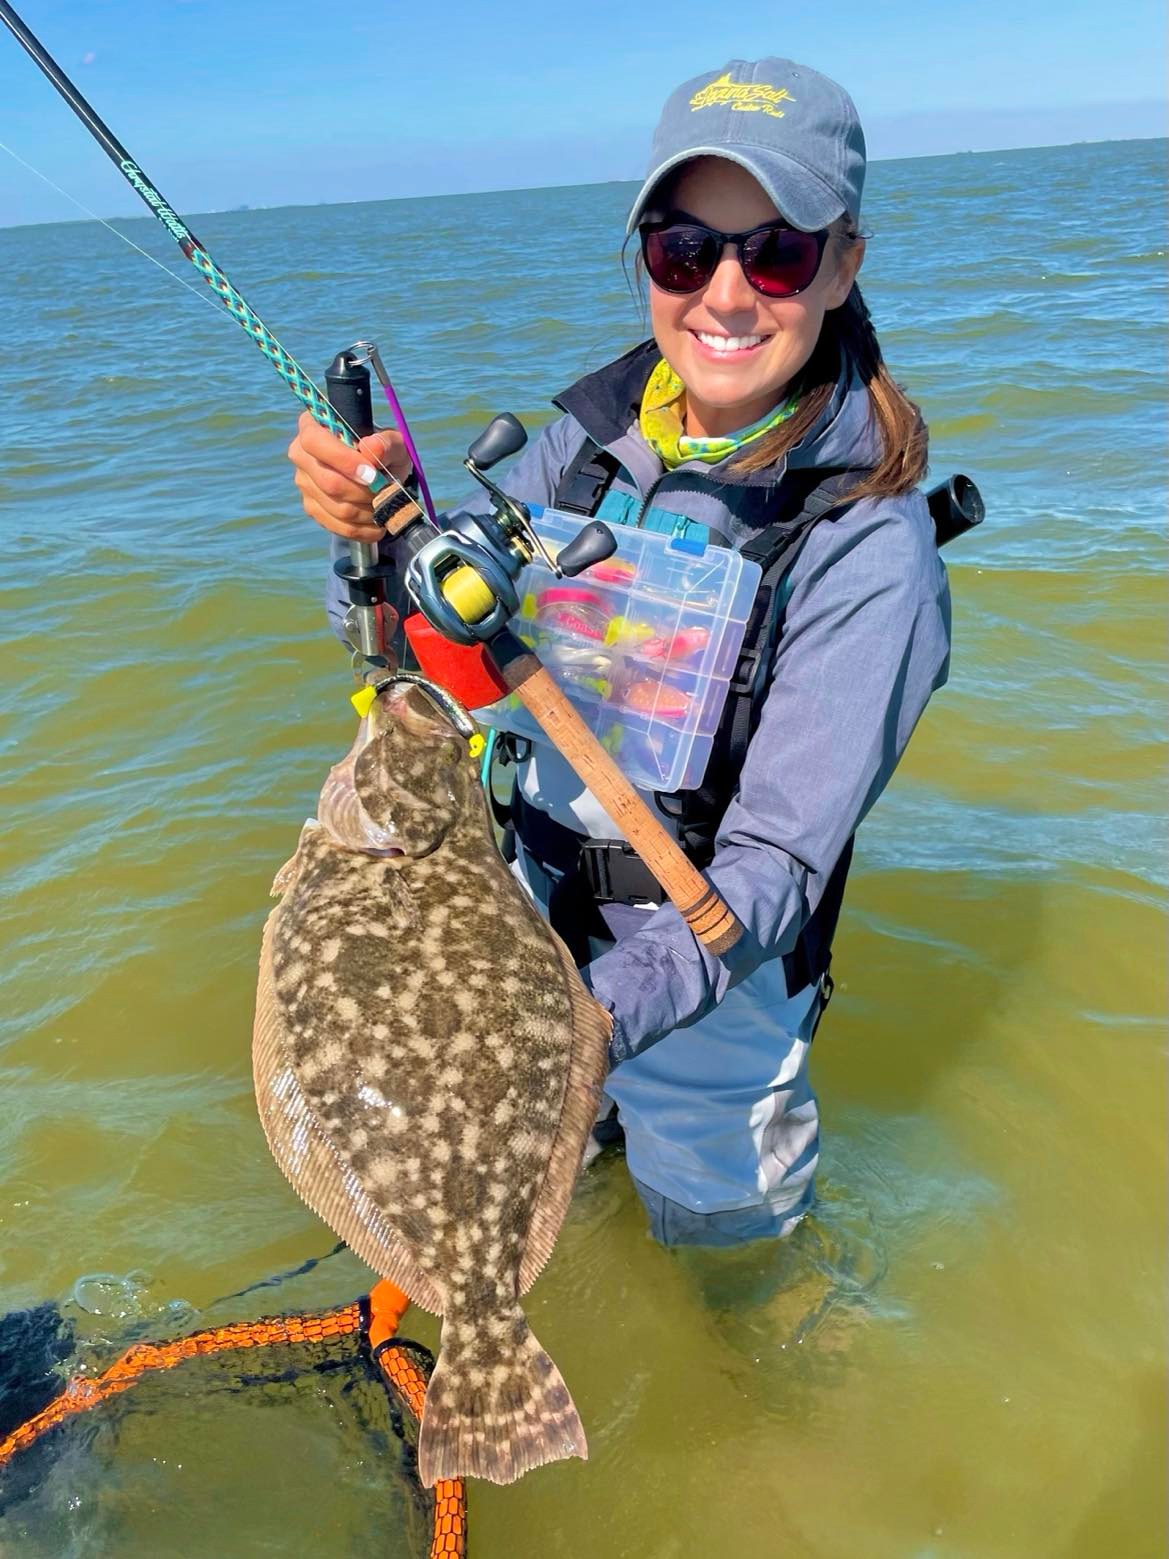 Texas angler catches, releases 23-inch flounder in Galveston